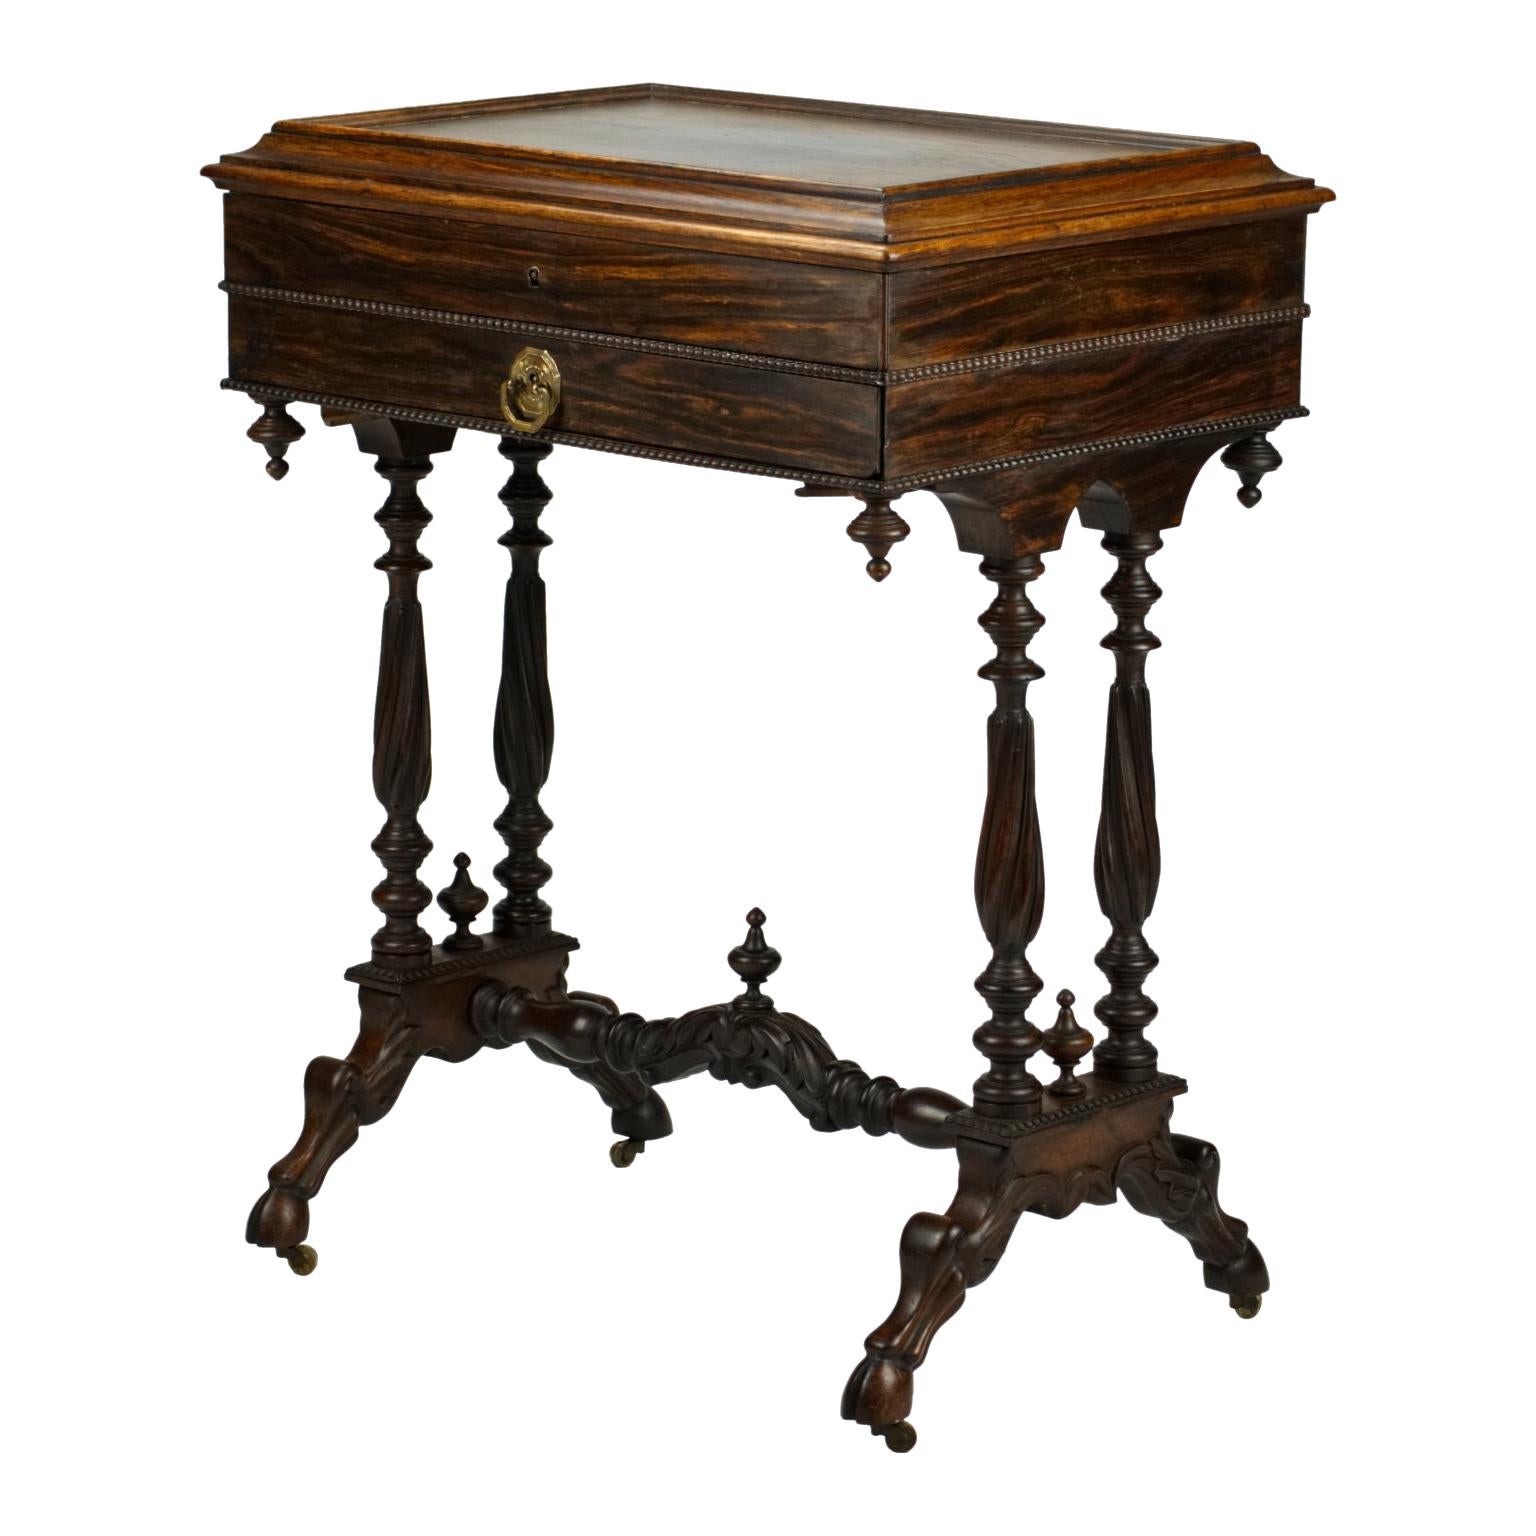 Victorian Hand Carved Rosewood Vanity or Work Table, 19th Century